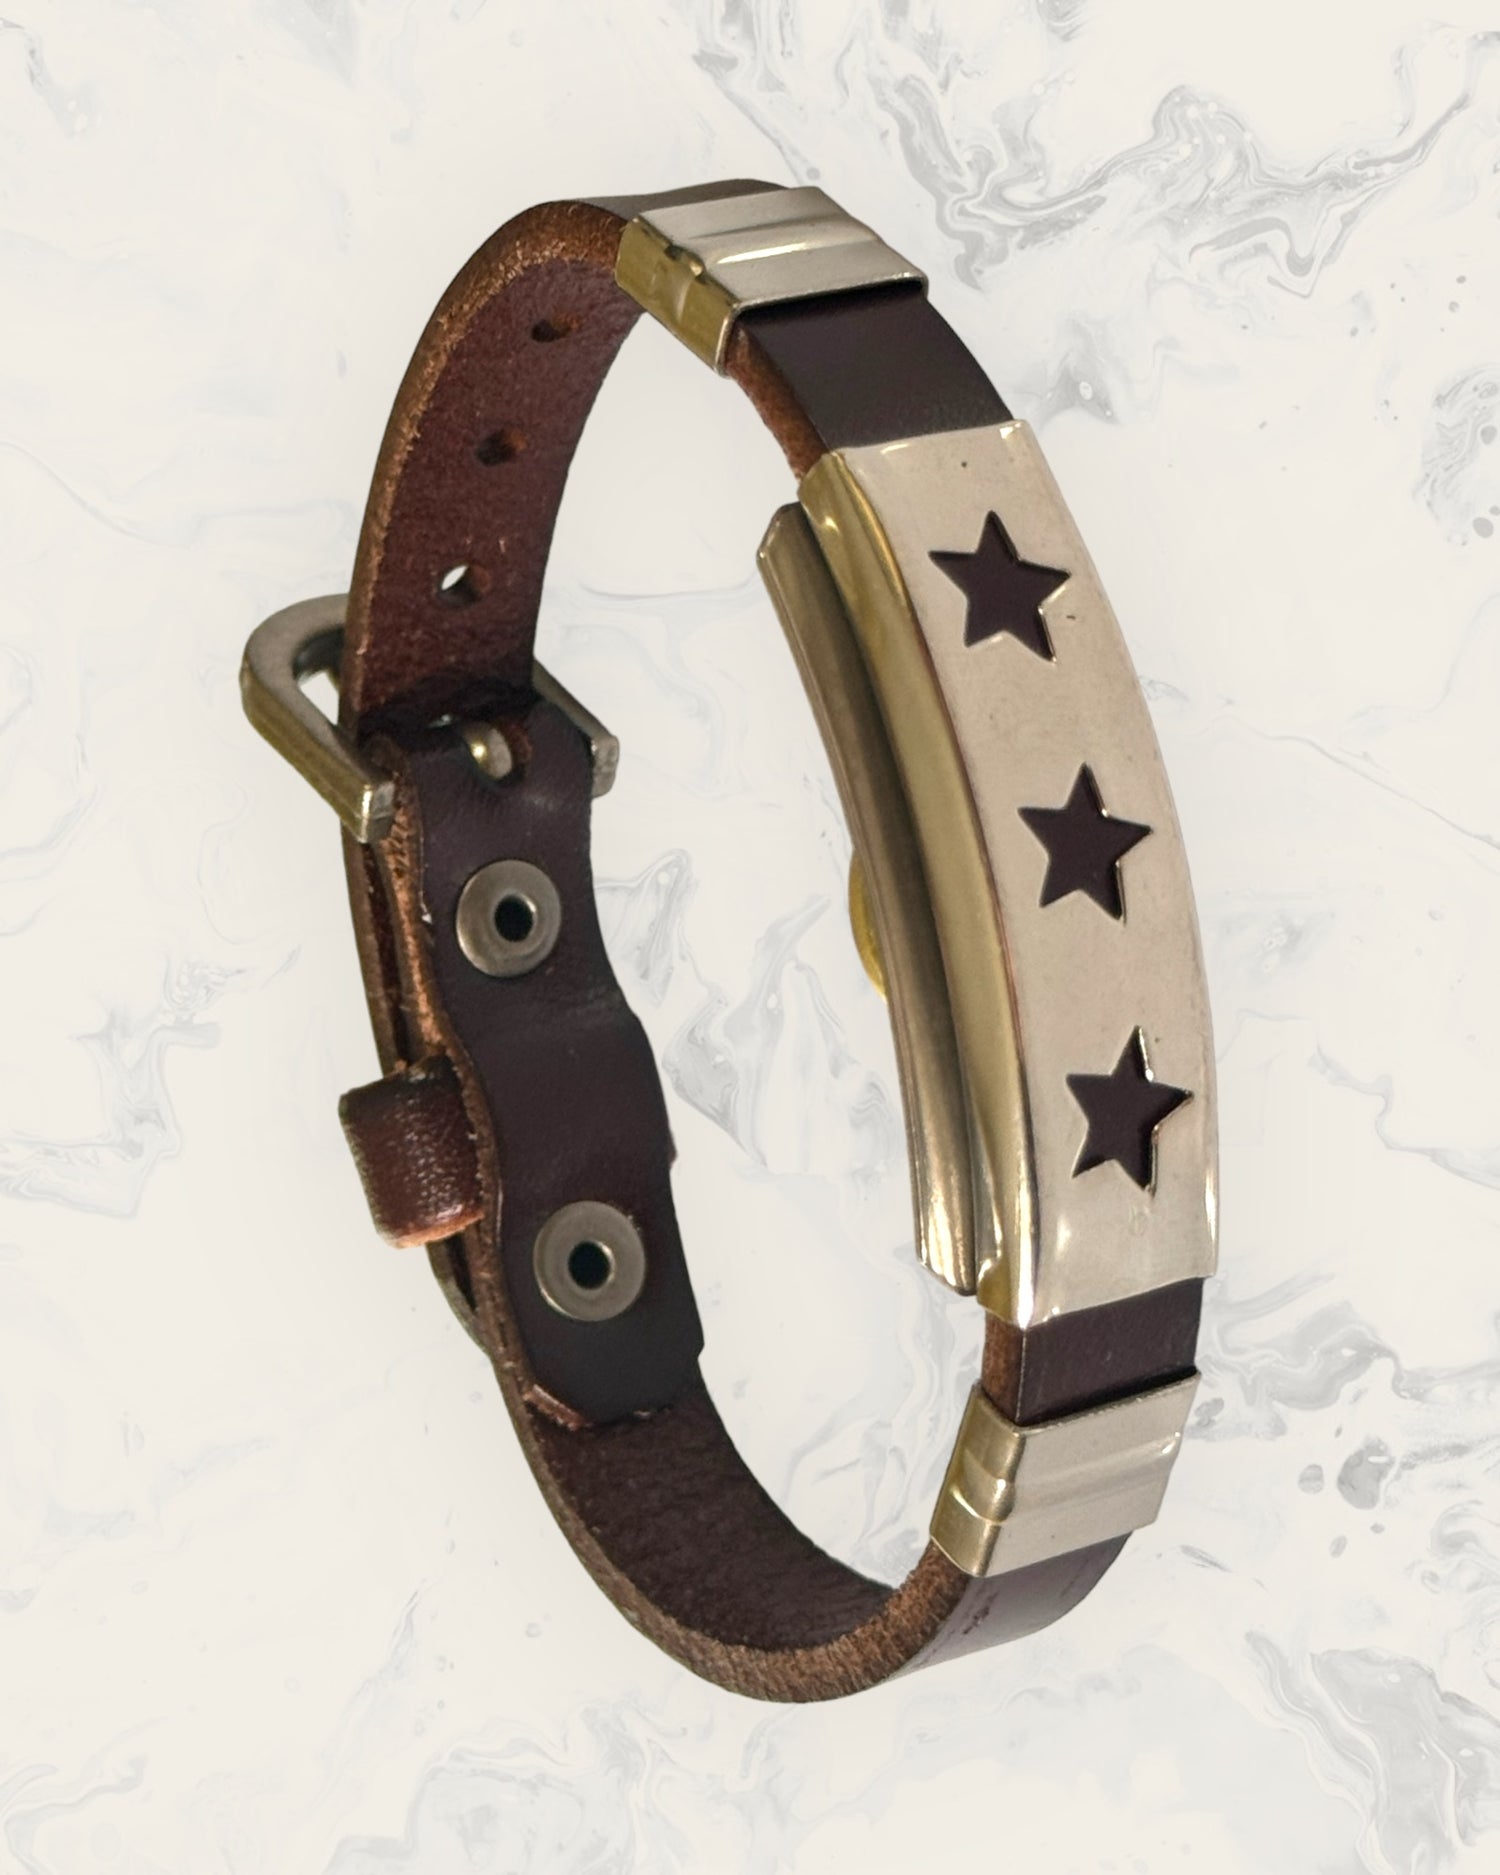 Frequency Jewelry Natural Pain Relief and EMF Protection Bracelet Leather Band Color Dark Brown with a Star design on a silver metal slider